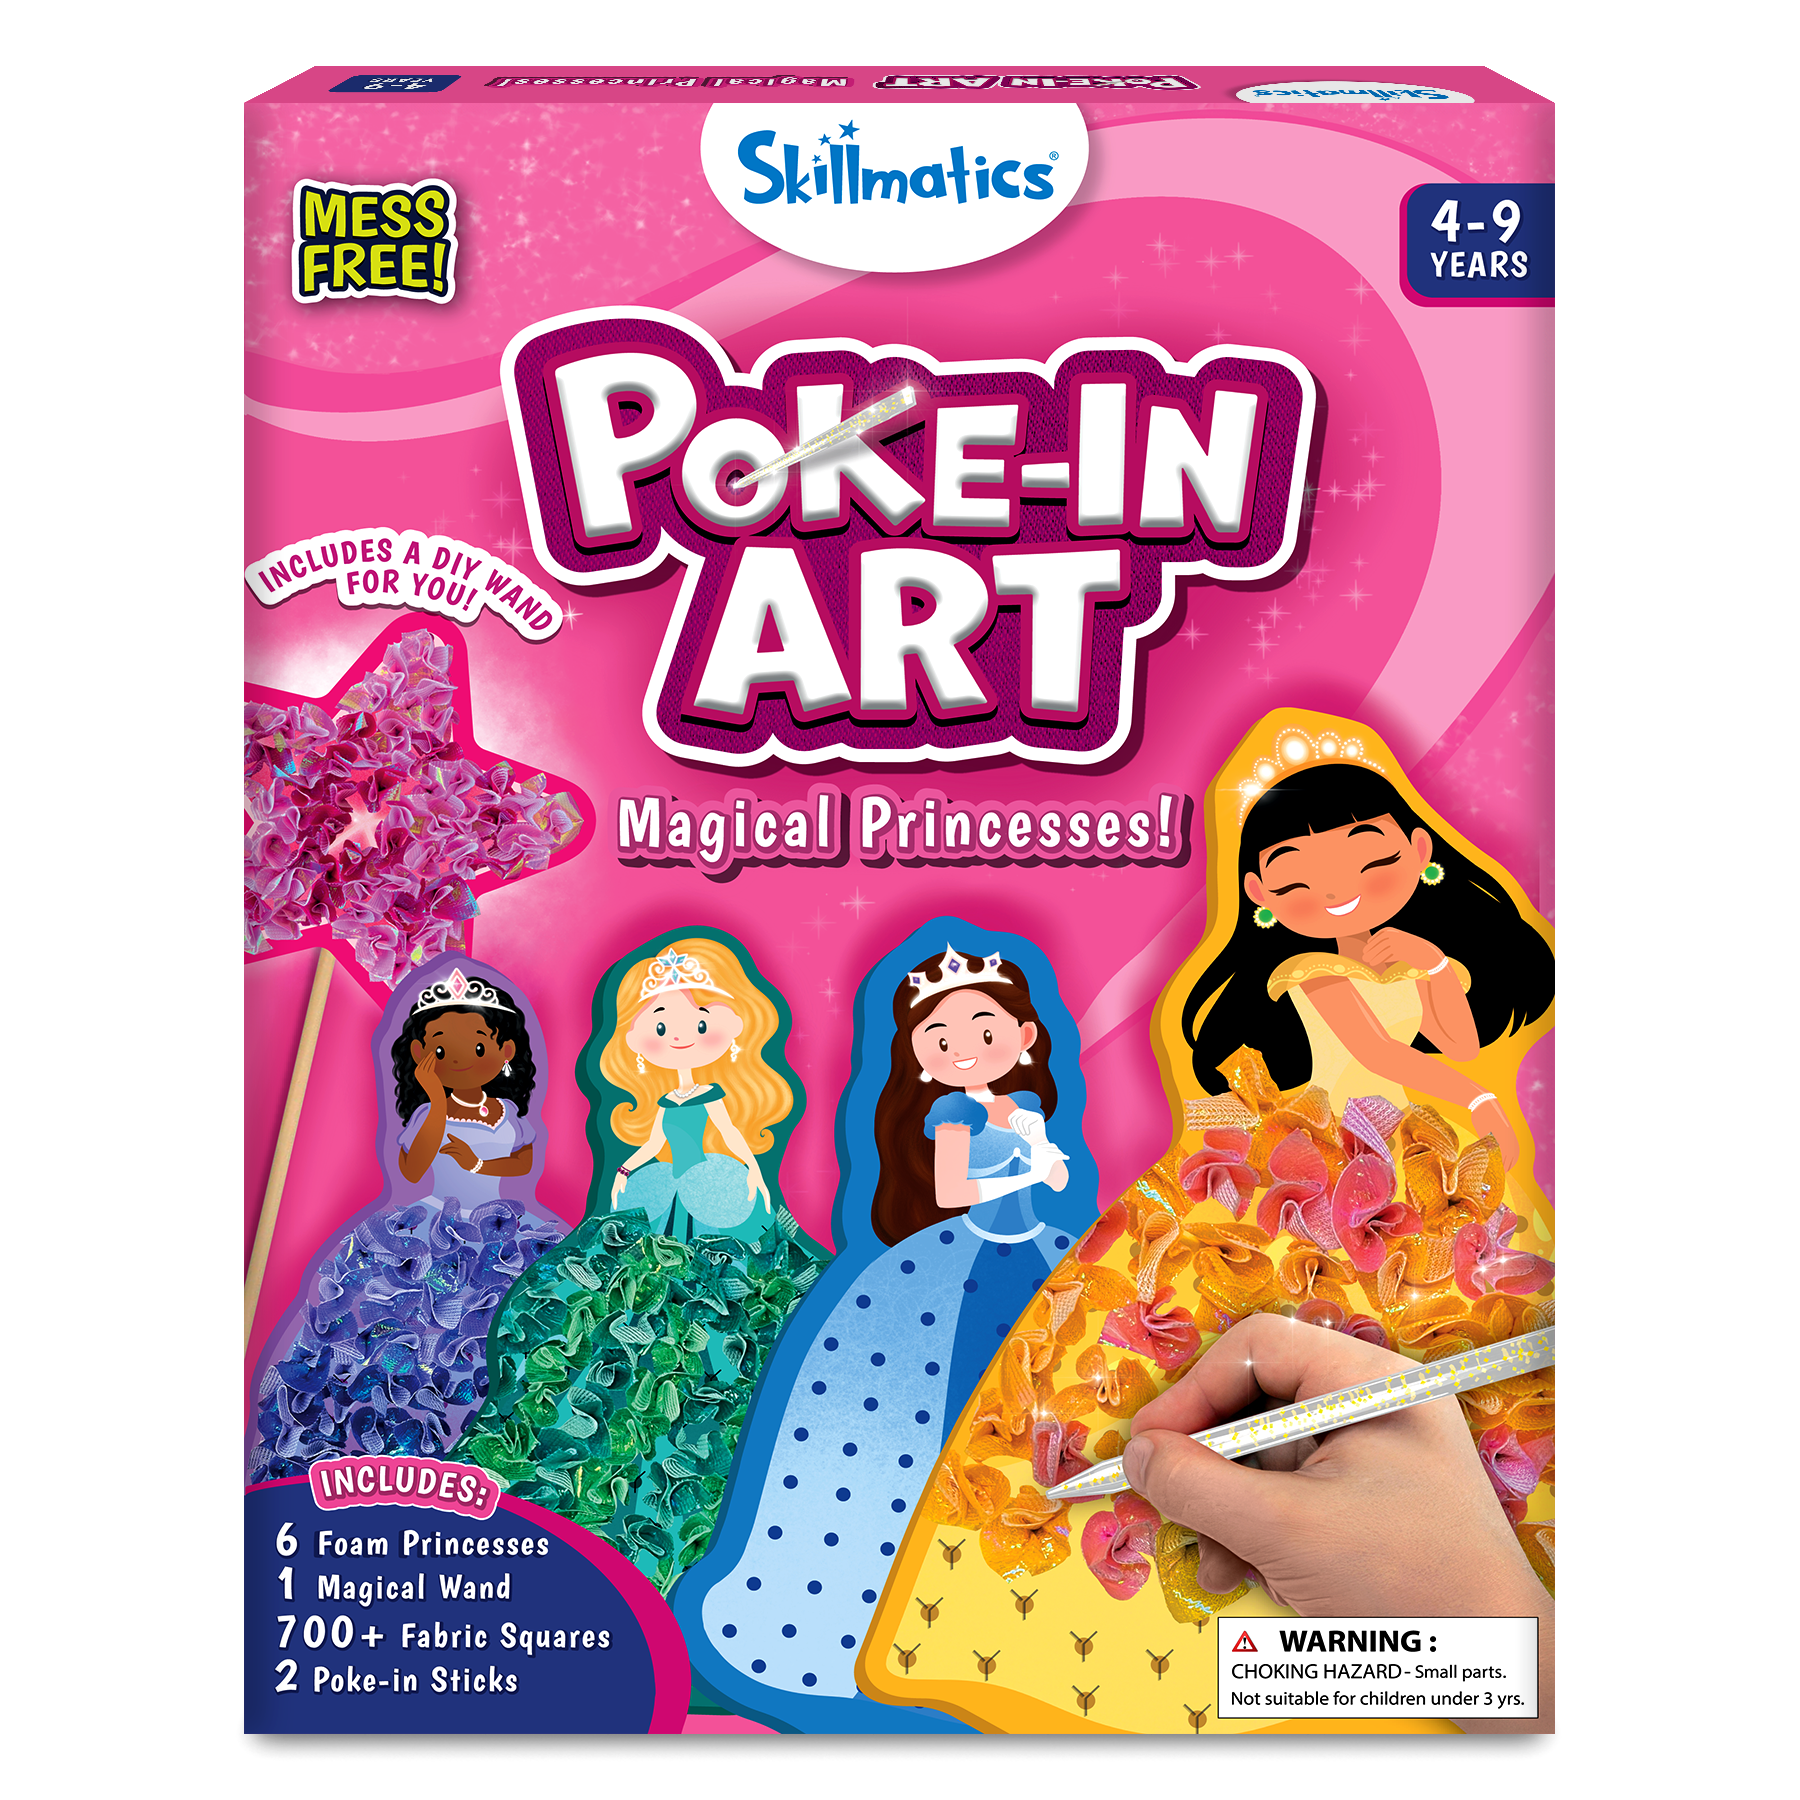 Skillmatics Art & Craft Activity - Poke-in Art Magical Princesses, Mess-Free Art for Kids, Craft Kits, DIY Activity, Gifts for Girls & Boys Ages 4, 5, 6, 7, 8, 9